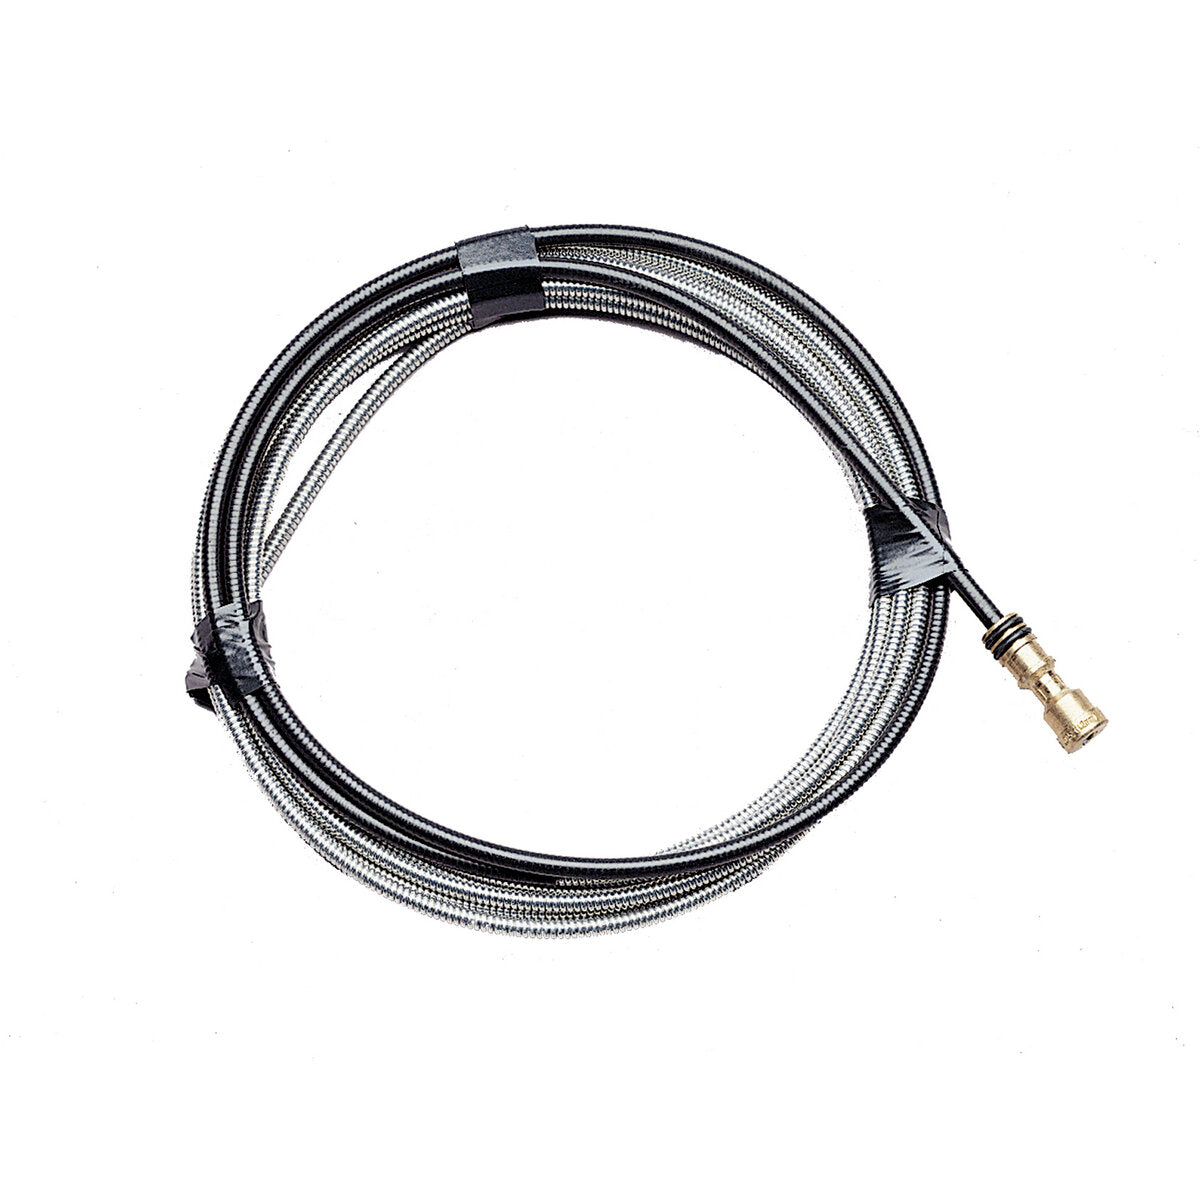 Lincoln Electric - Cable Liner .052-1/16 in (1.3-1.6 mm) 25 ft (7.6 m) - KP45-116-25